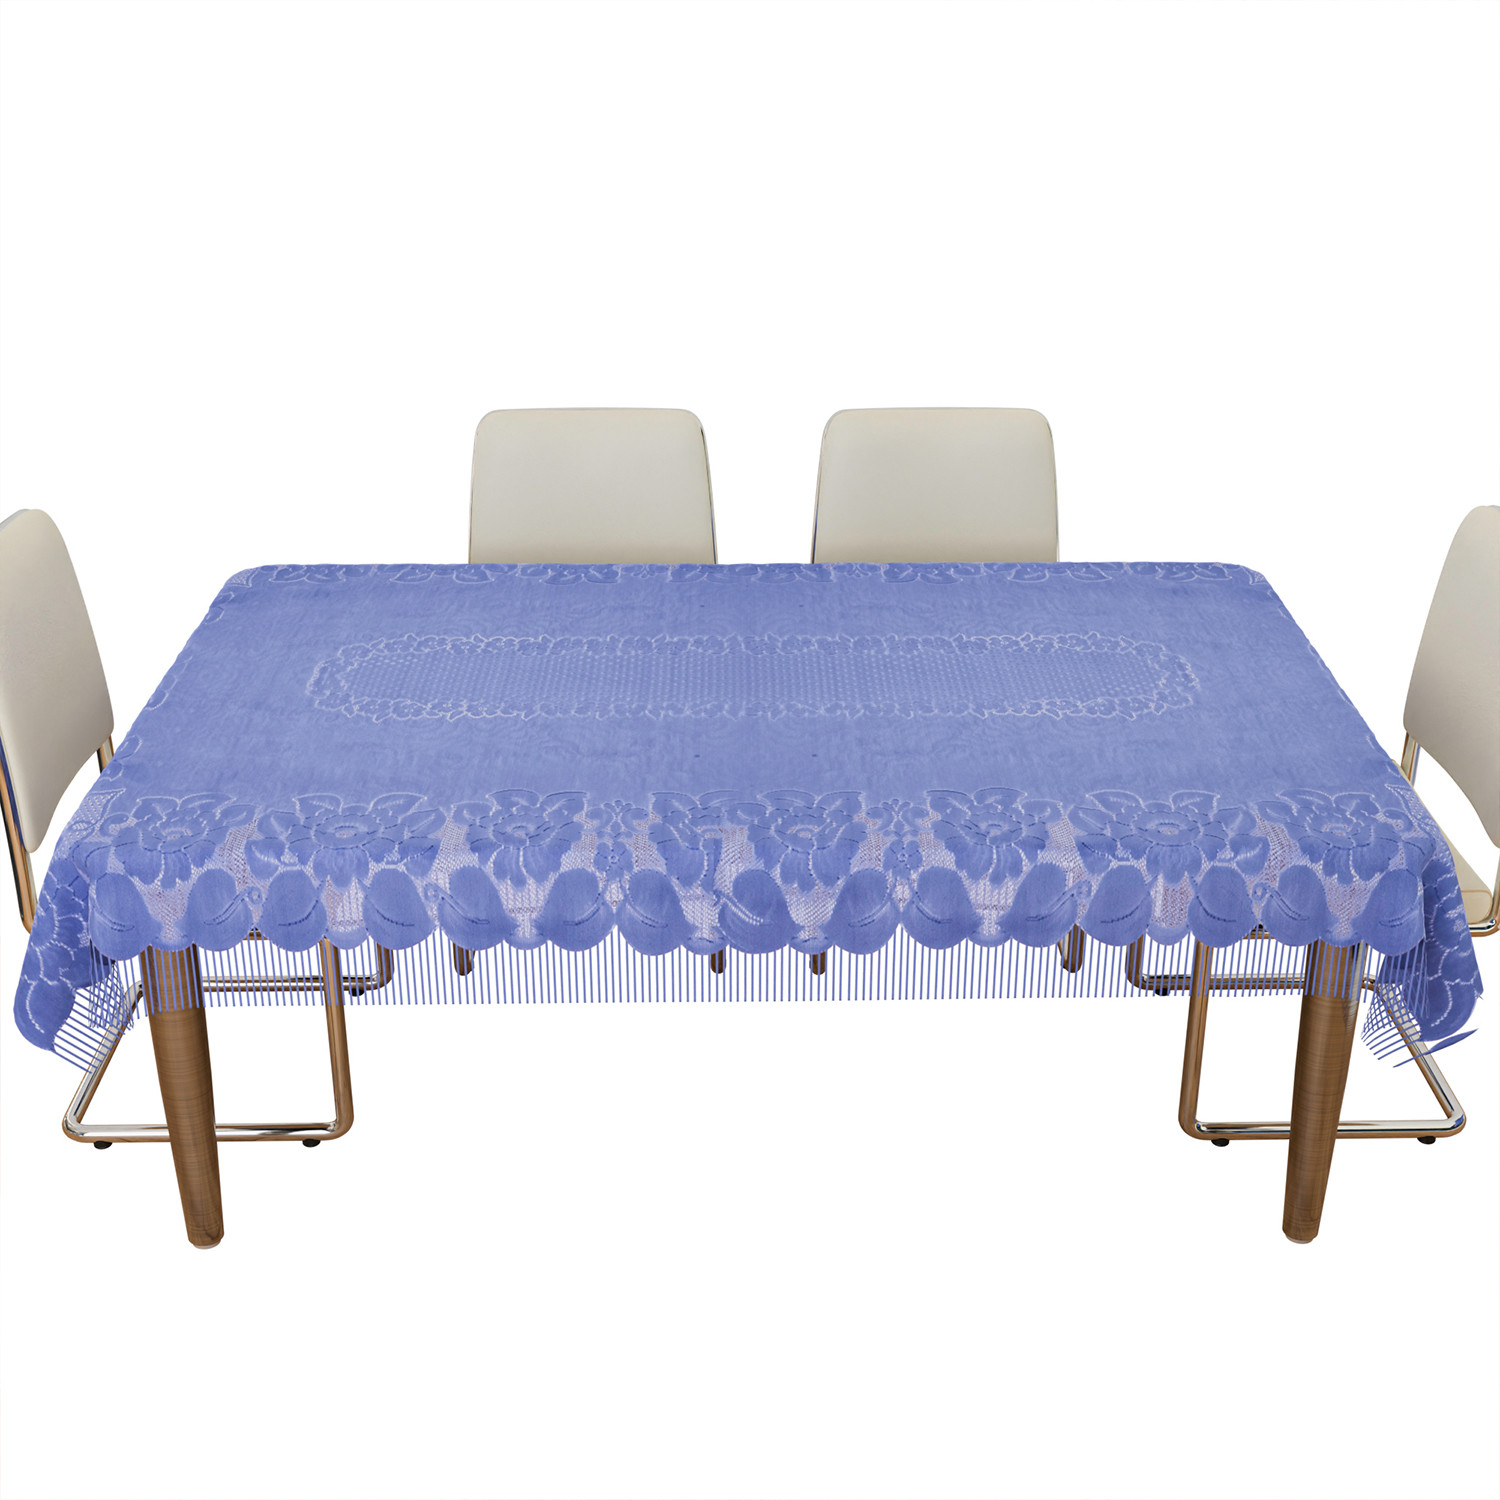 Kuber Industries Dining Table Cover | Net Table Cloth Cover | 6 Seater Table Cloth | Jhalar Table Cover | Table Protector | Table Cover for Dining Table | 60x90 Inch | DTC | Blue